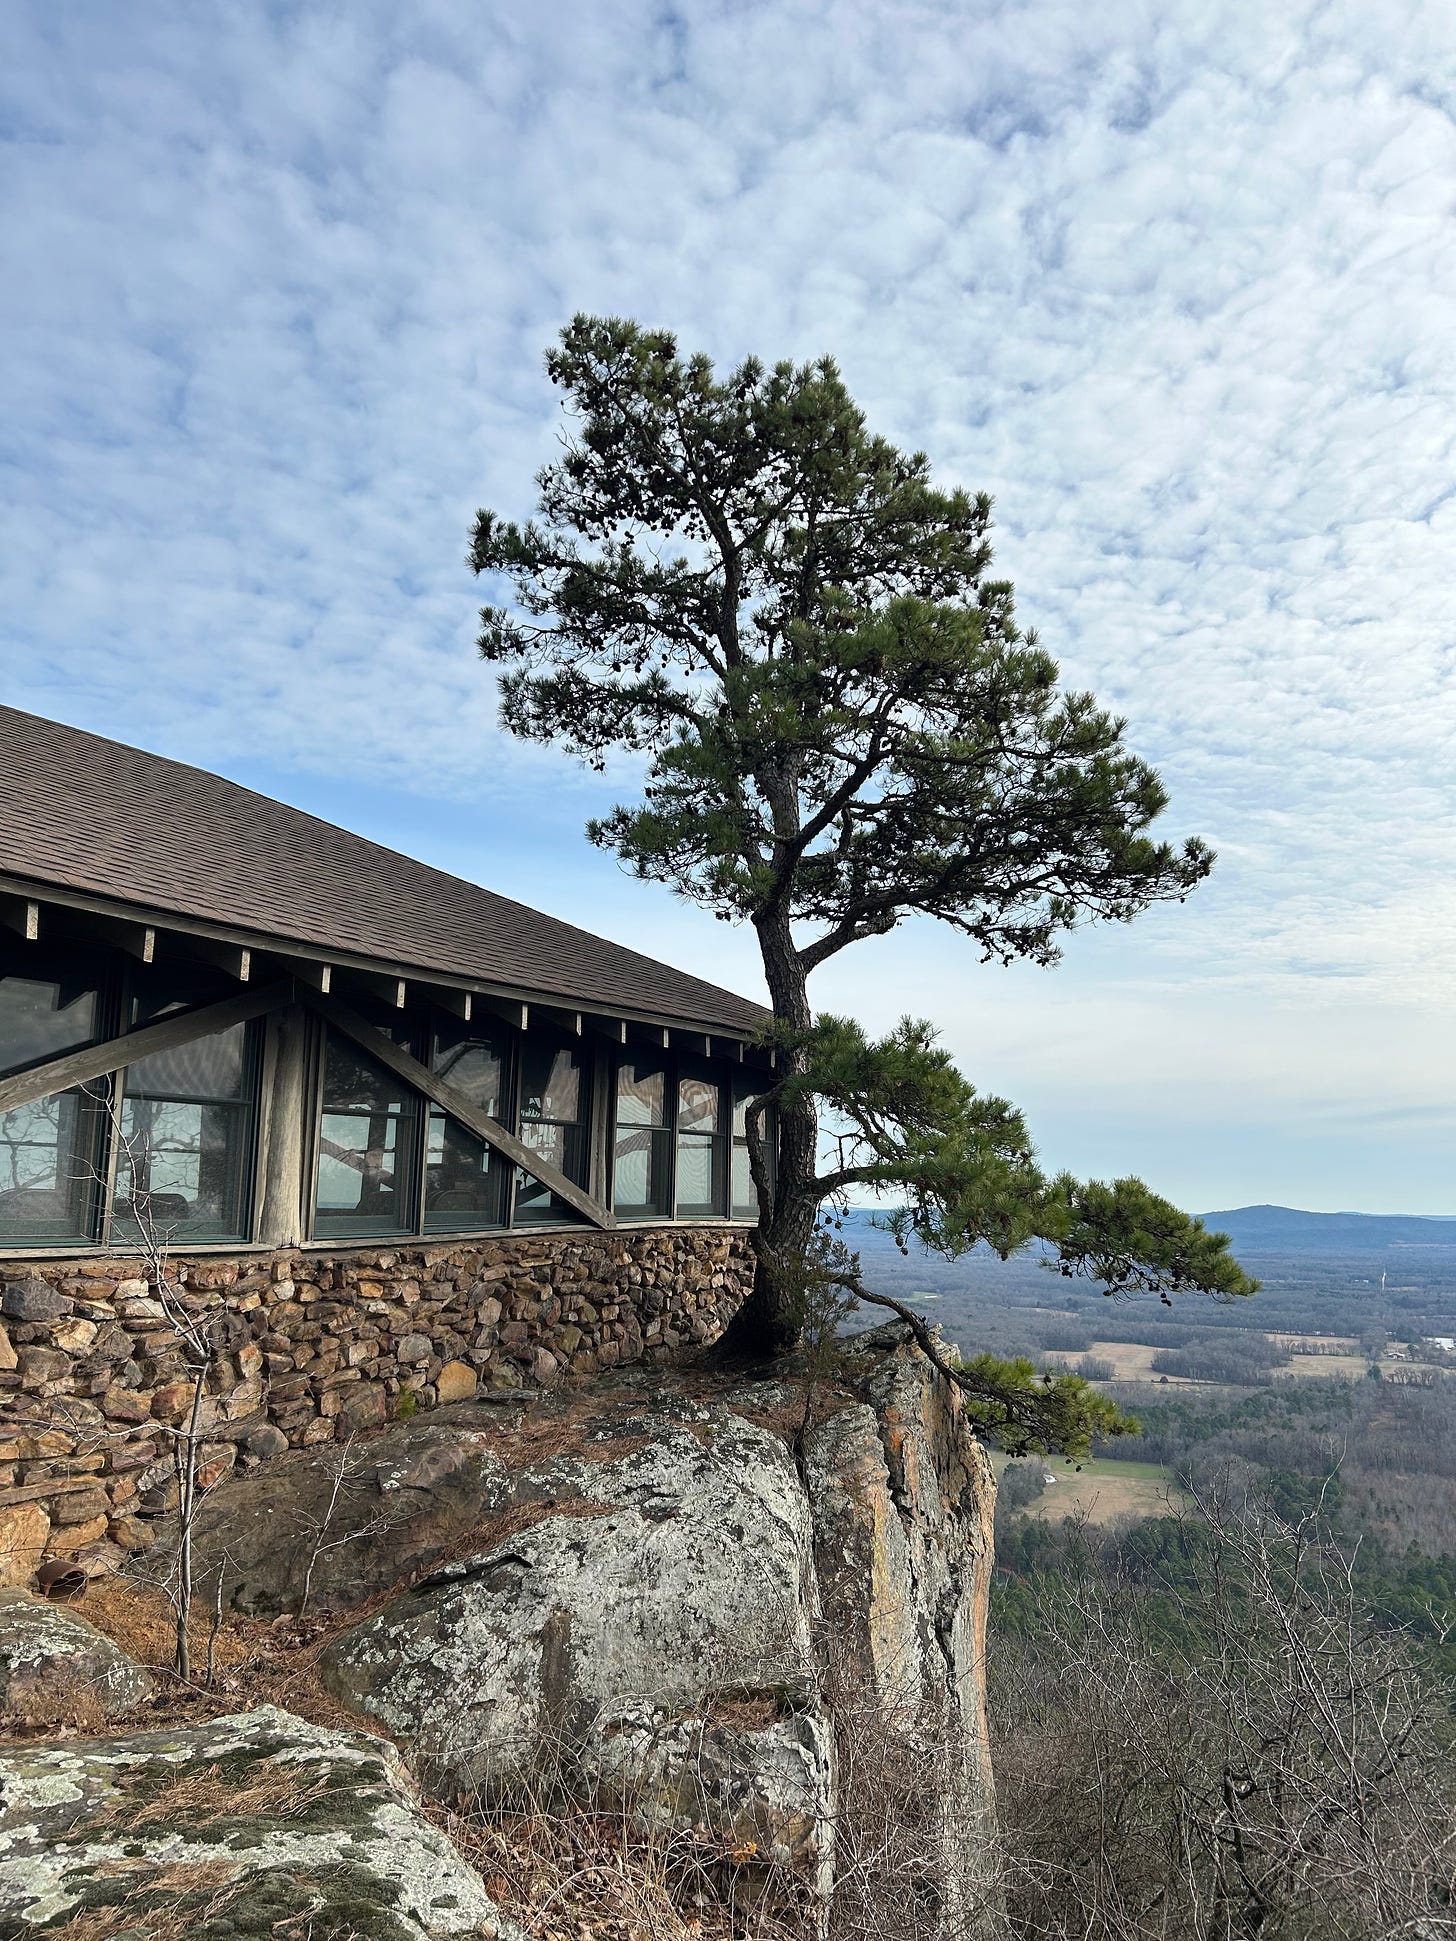 A pine tree grows on the edge of a cliff by a stone camp building. The sky is blue and lightly clouded.